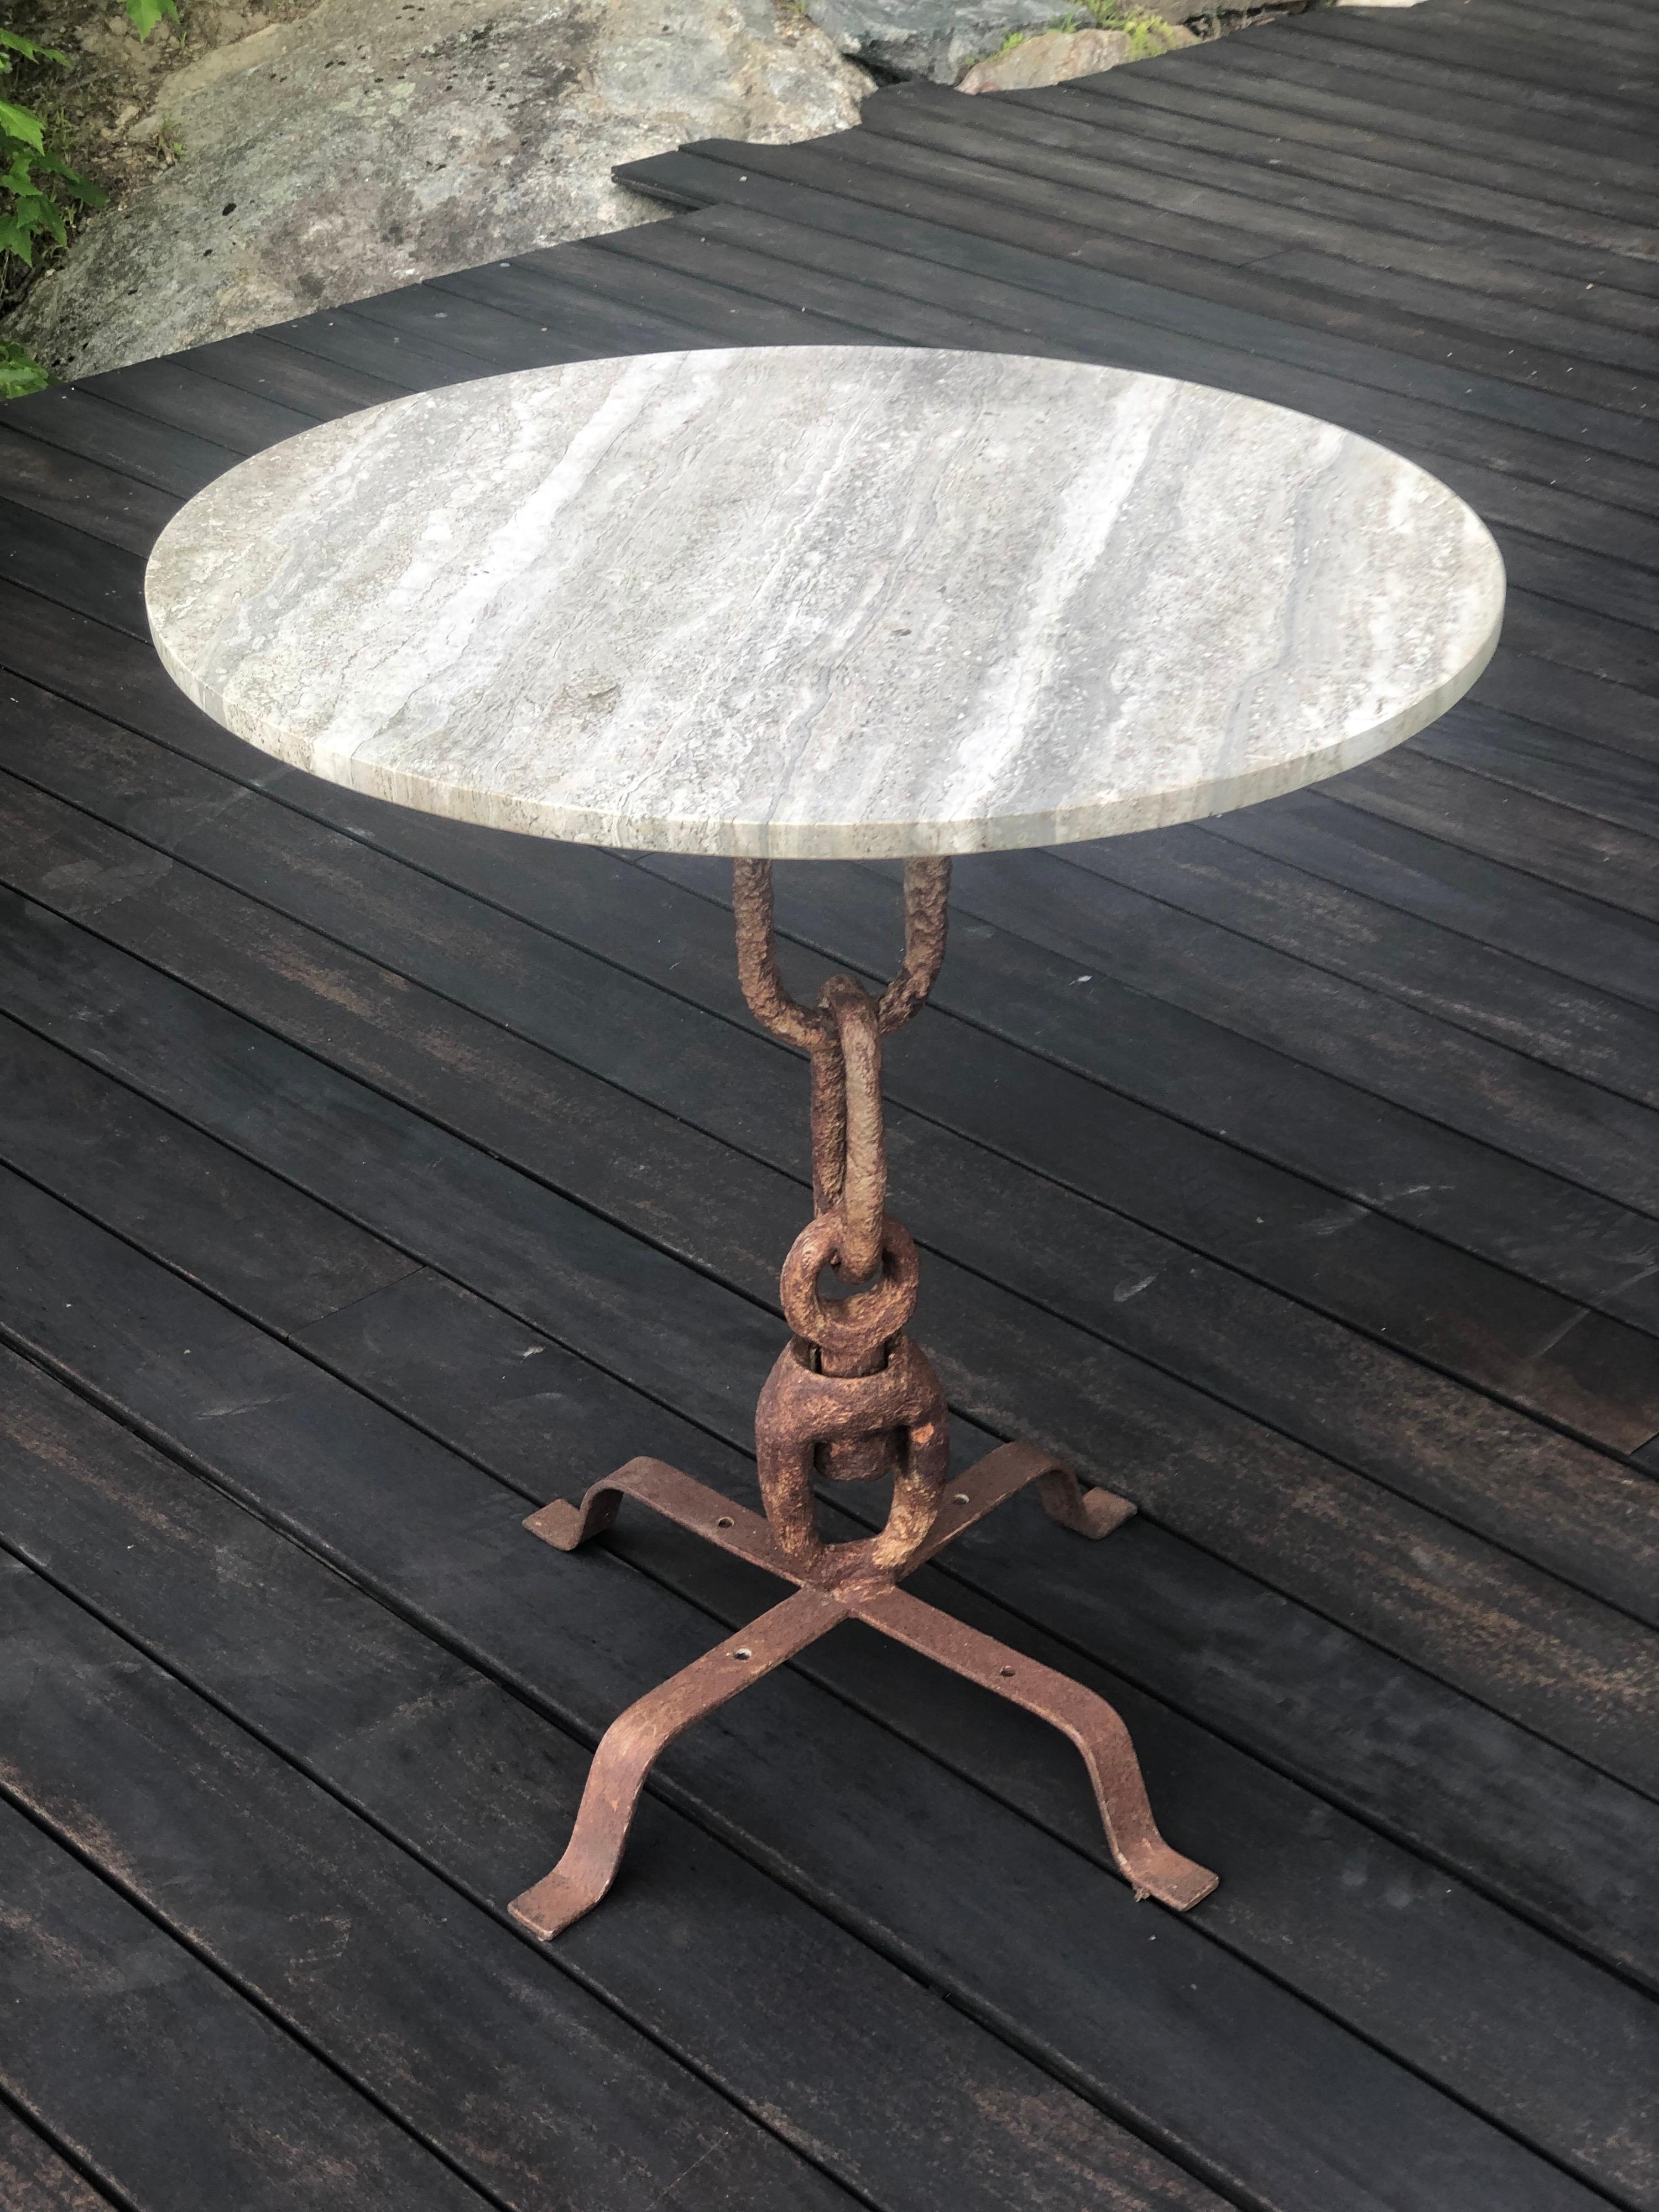 An elegant French mid-century hand wrought iron & silver travertine dining / garden table reminiscent of Alberto and Diego Giacometti circa 1940. The piece combines ancient forms and the modern in a startling dialogue that was characteristic of the